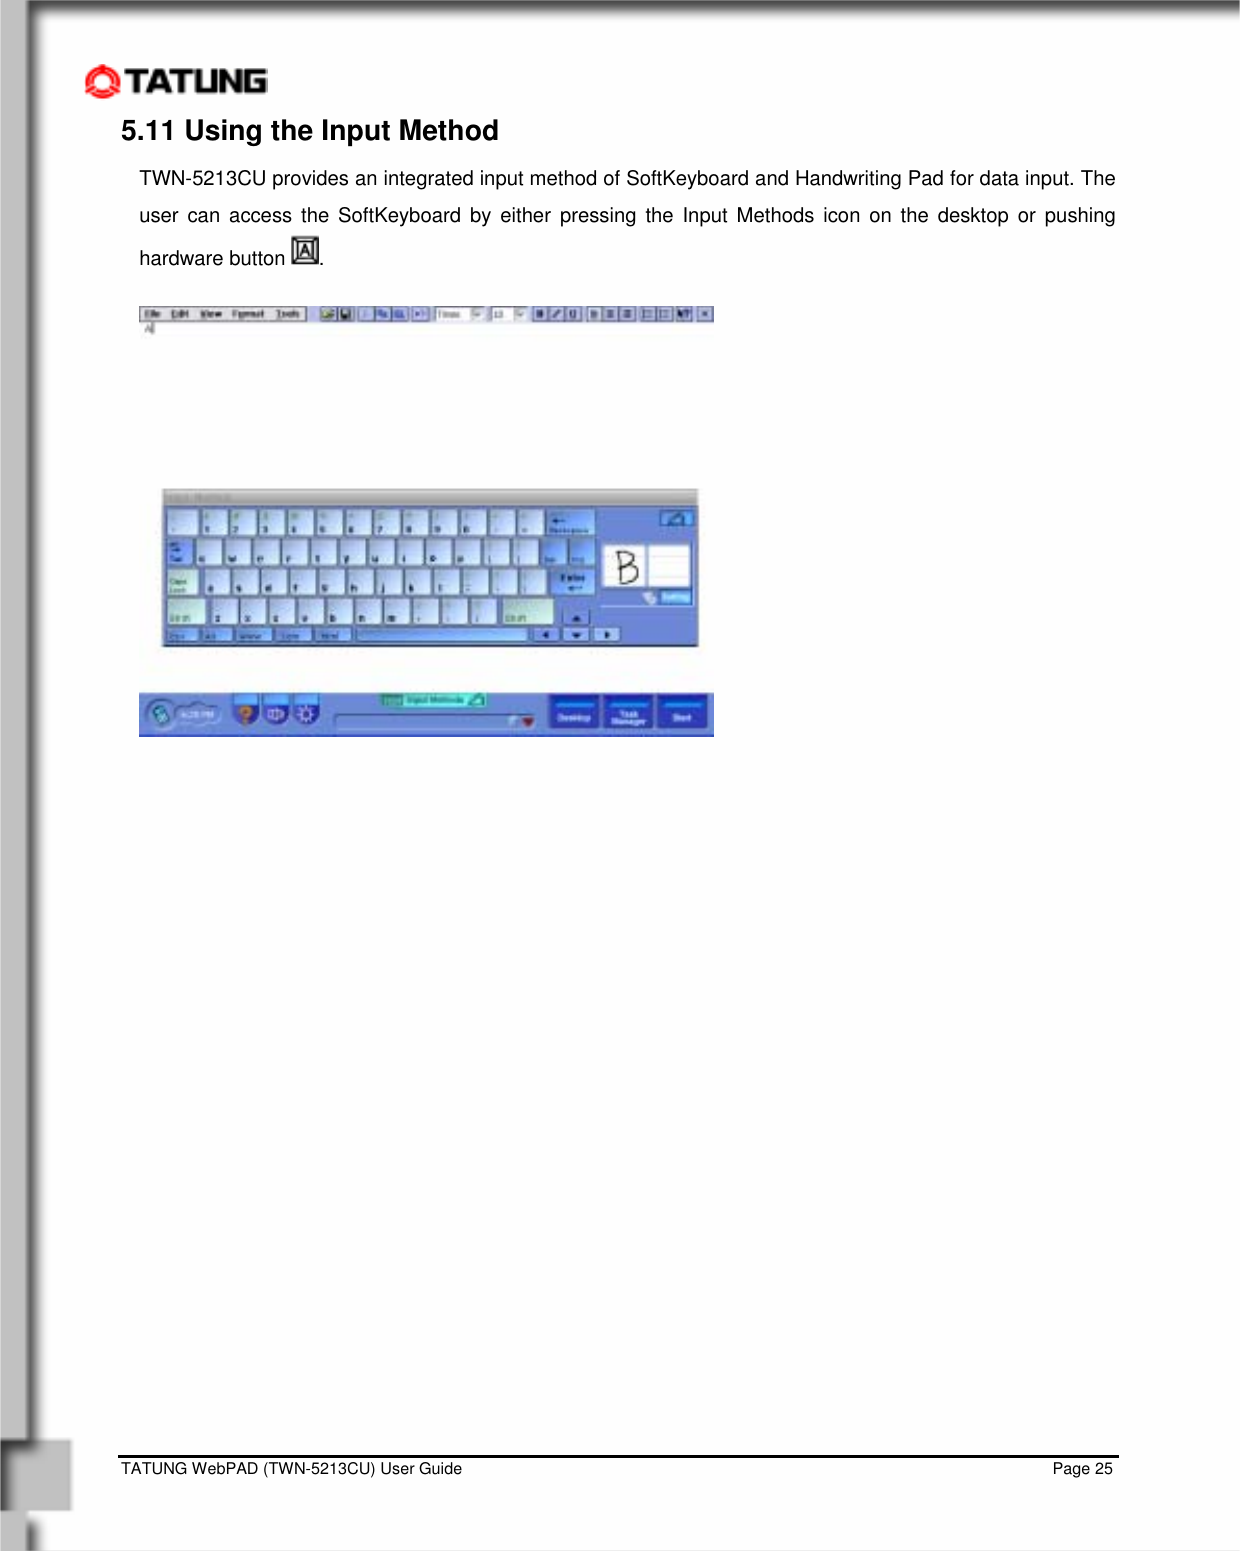    TATUNG WebPAD (TWN-5213CU) User Guide                                                                                                                                   Page 25 5.11 Using the Input Method TWN-5213CU provides an integrated input method of SoftKeyboard and Handwriting Pad for data input. The user can access the SoftKeyboard by either pressing the Input Methods icon on the desktop or pushing hardware button  .    